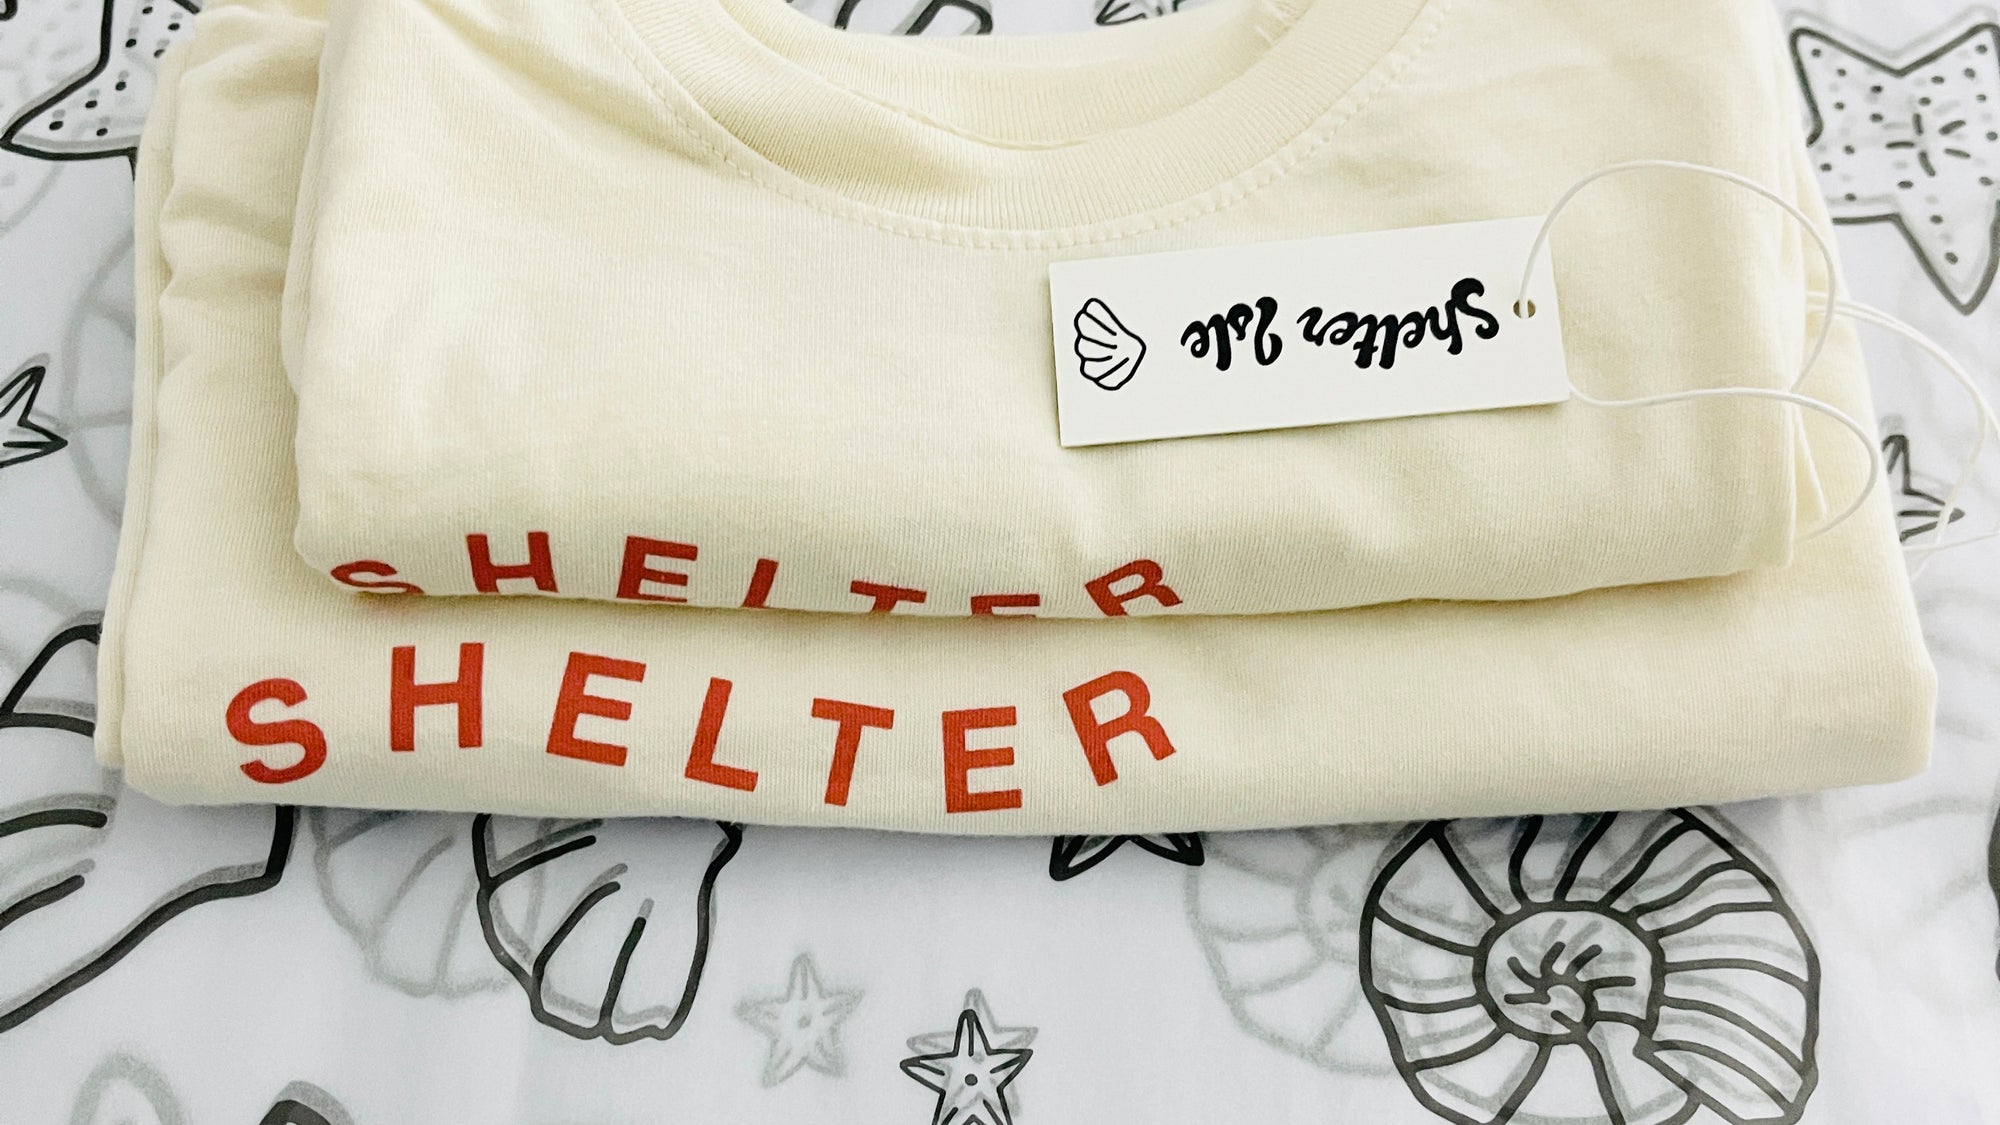 Free local delivery for Shelter Island apparel